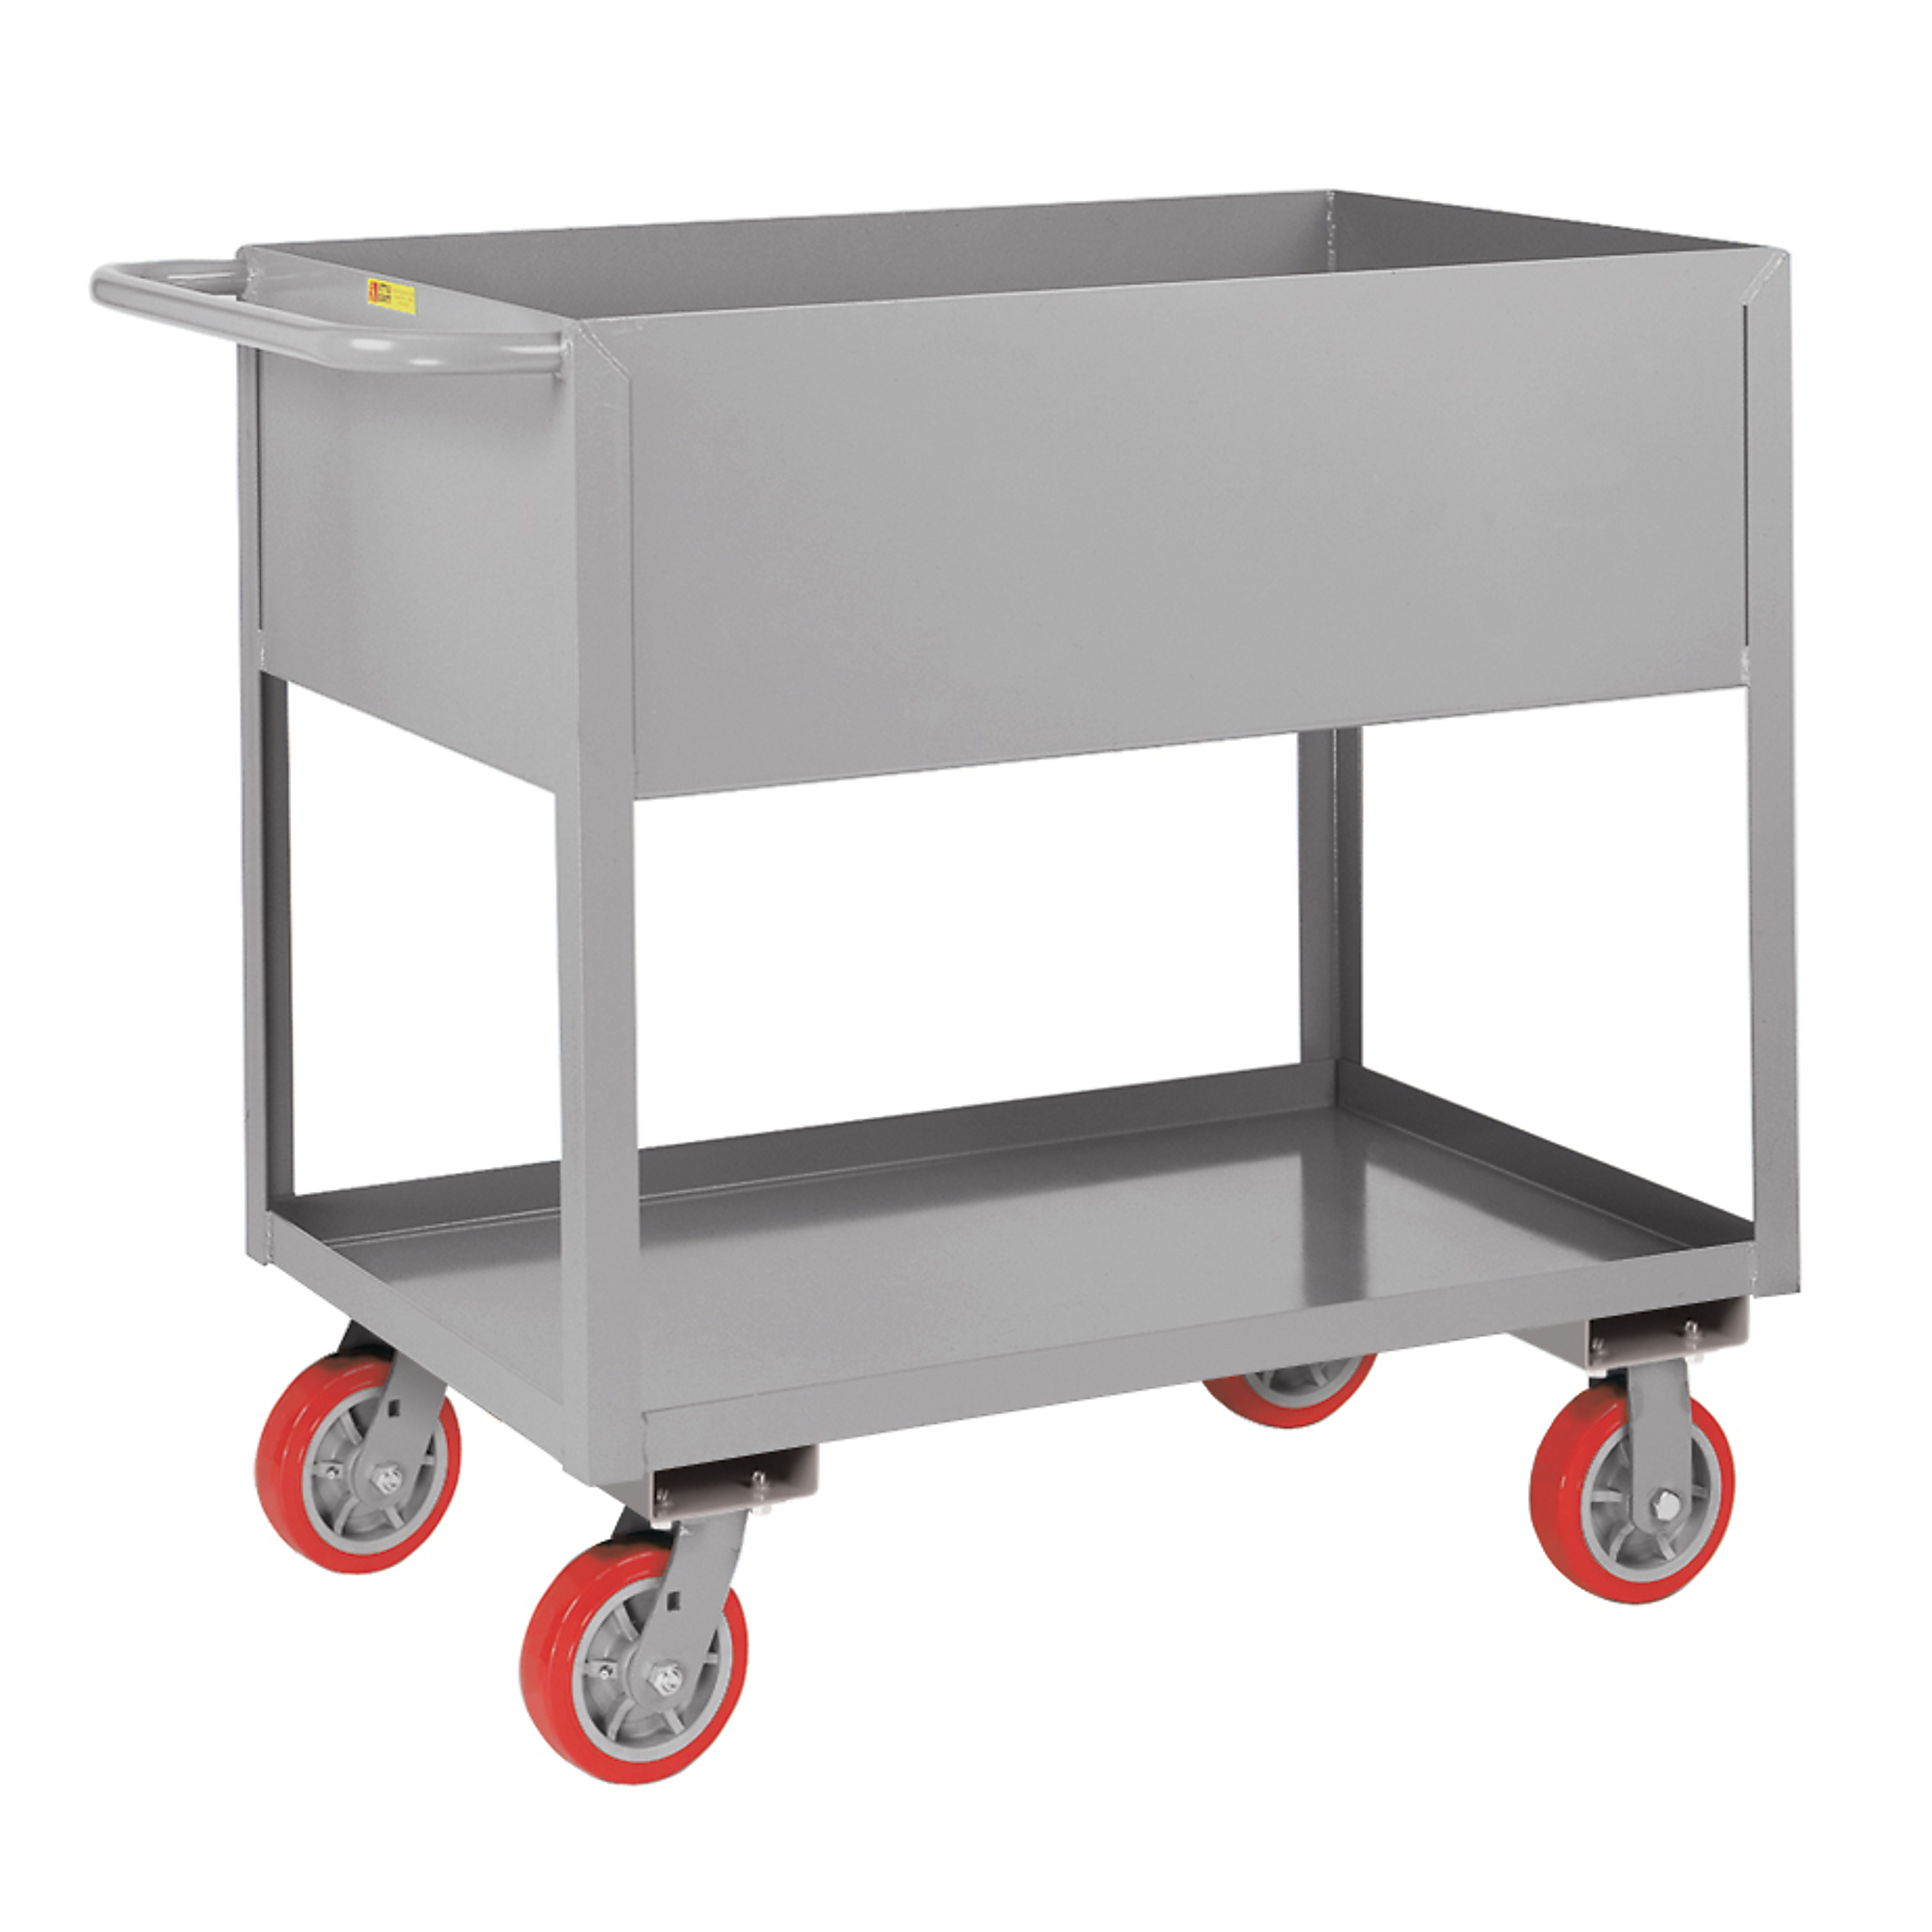 Little Giant, 12Inch Deep Shelf Truck, 18x30, 3600 lbs, Total Capacity 3600 lb, Shelves (qty.) 2, Material Carbon Steel, Model DS1830X12-6PY